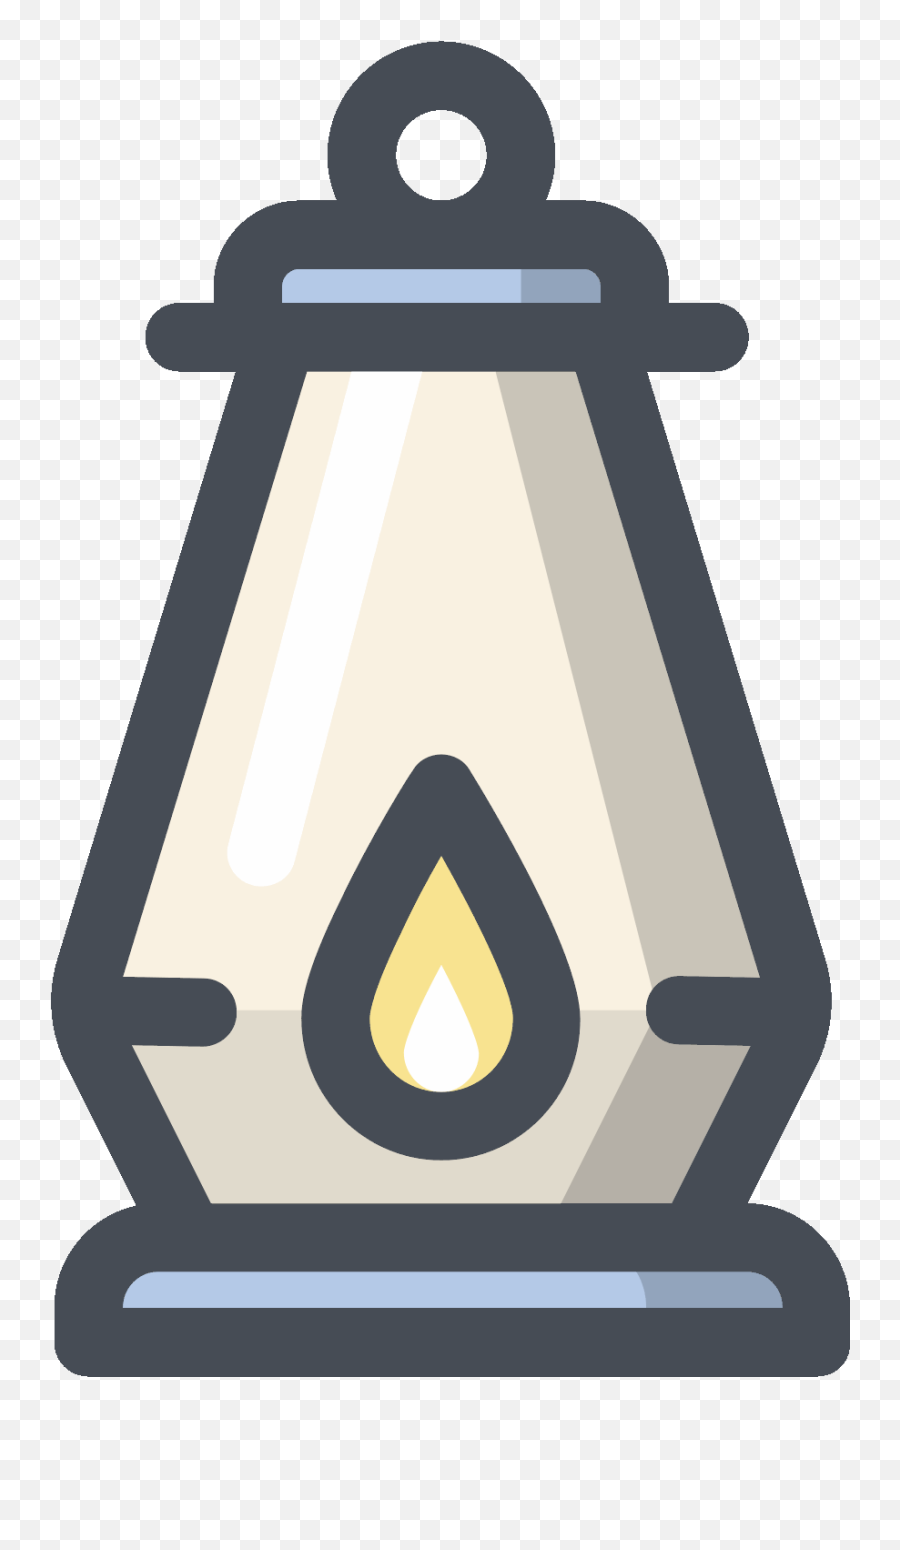 Download Oil Lamp Icon Png Image With No Background - Pngkeycom Clip Art,Oil Change Icon